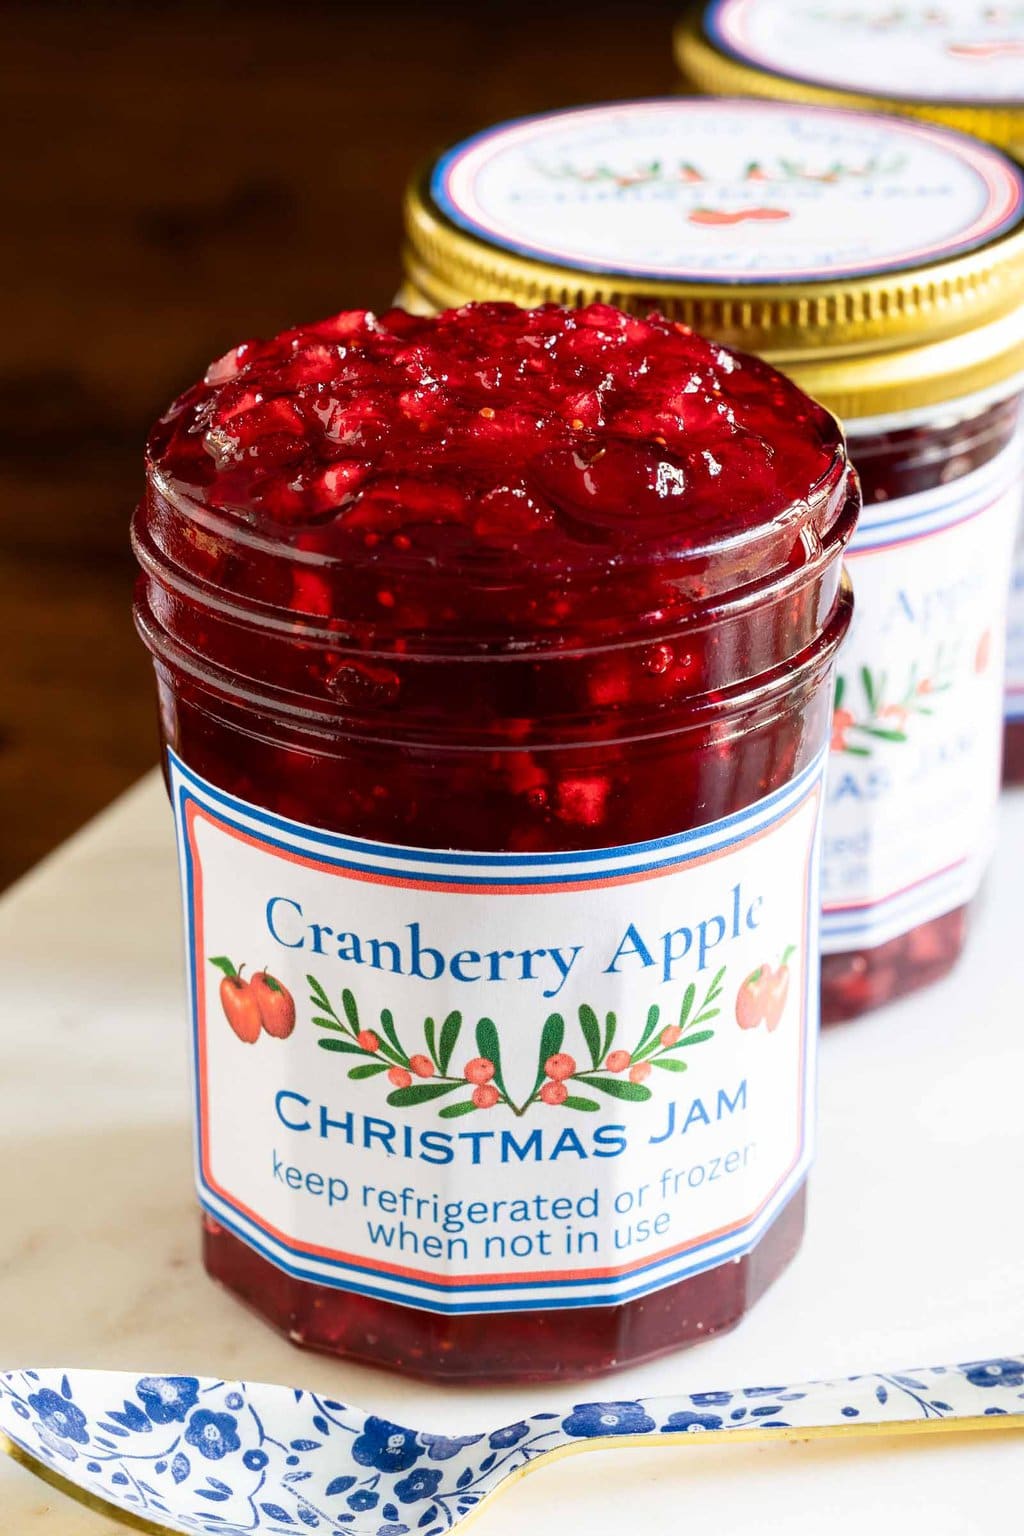 Vertical closeup photo of jars of Cranberry Apple Christmas Jam on a white marble slab